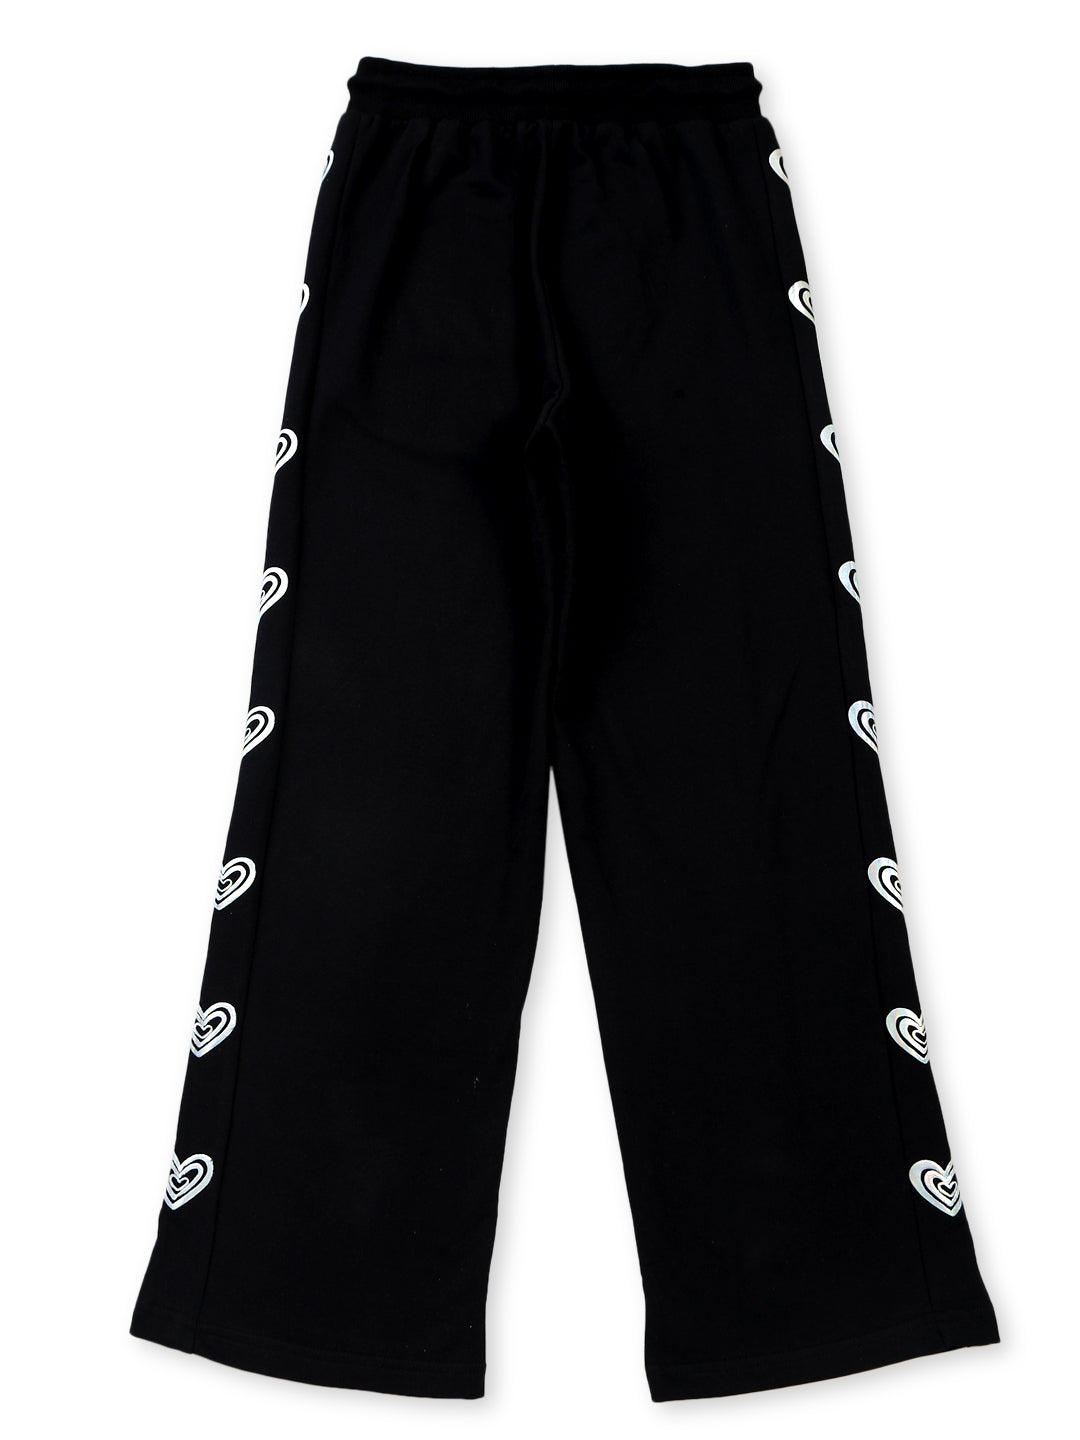 Girls Black Cotton Solid Track Pant